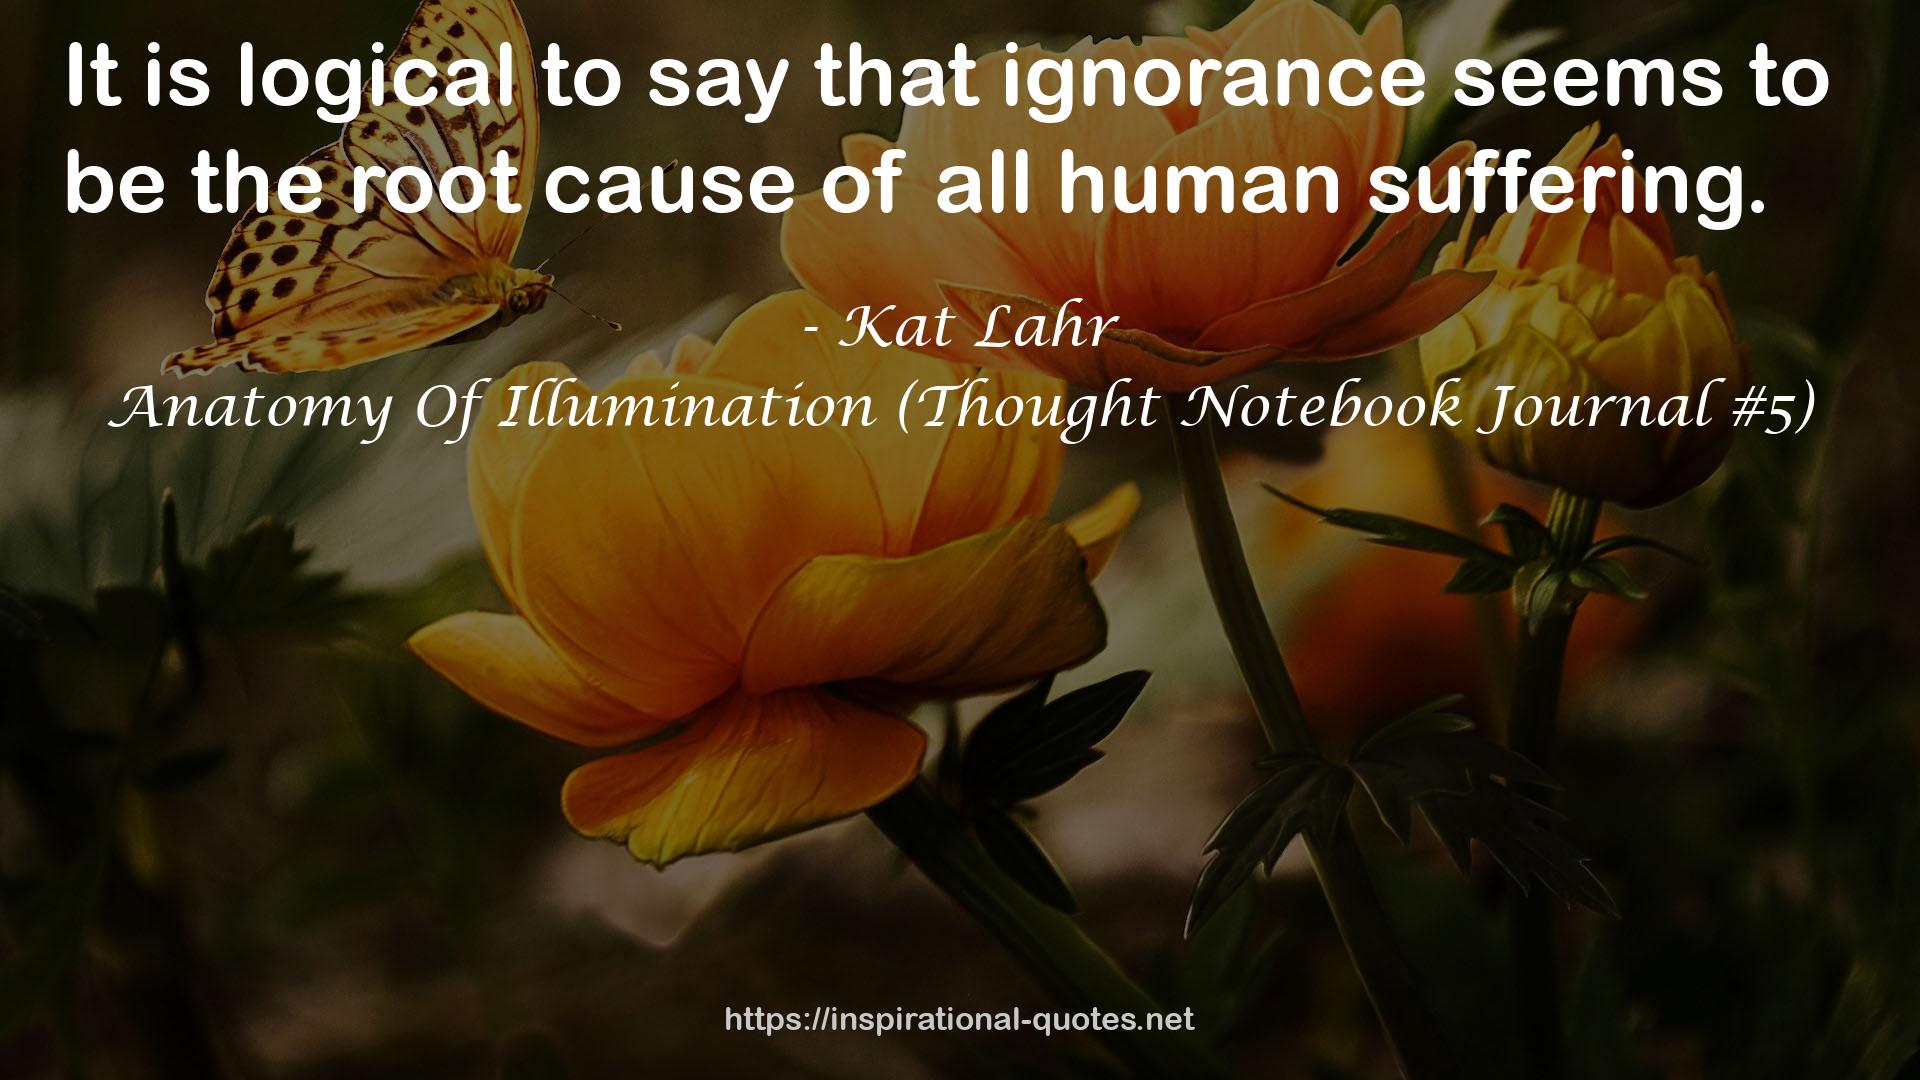 Anatomy Of Illumination (Thought Notebook Journal #5) QUOTES